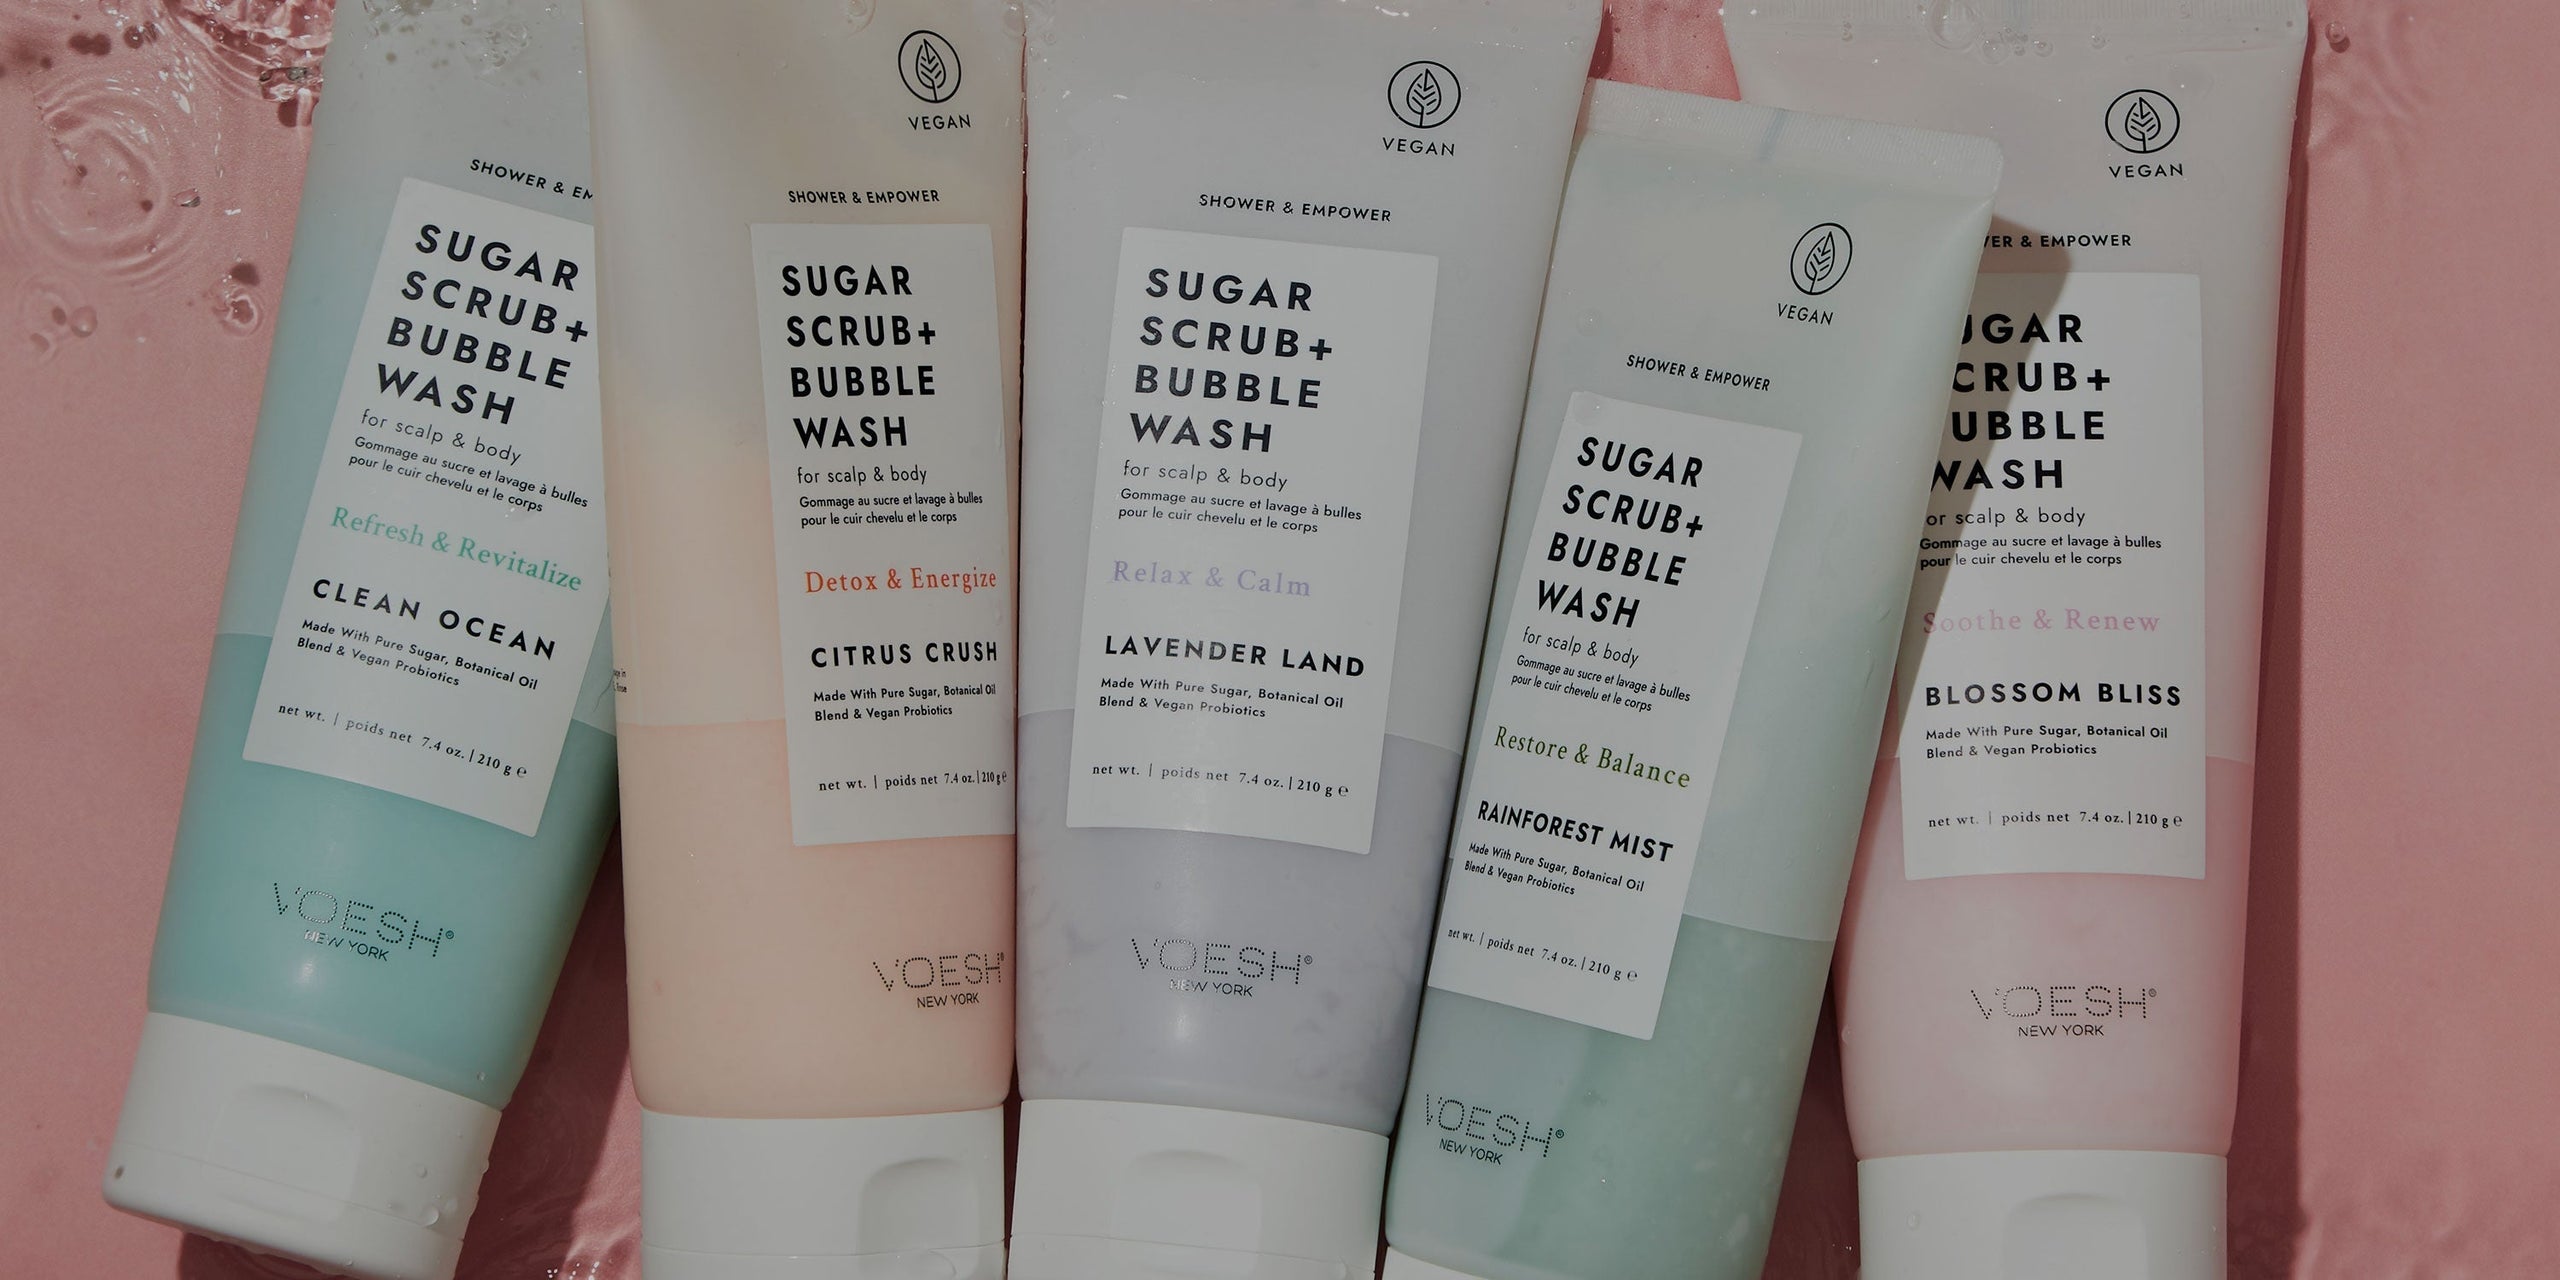 Collection of Shower and Empower Sugar scrubs